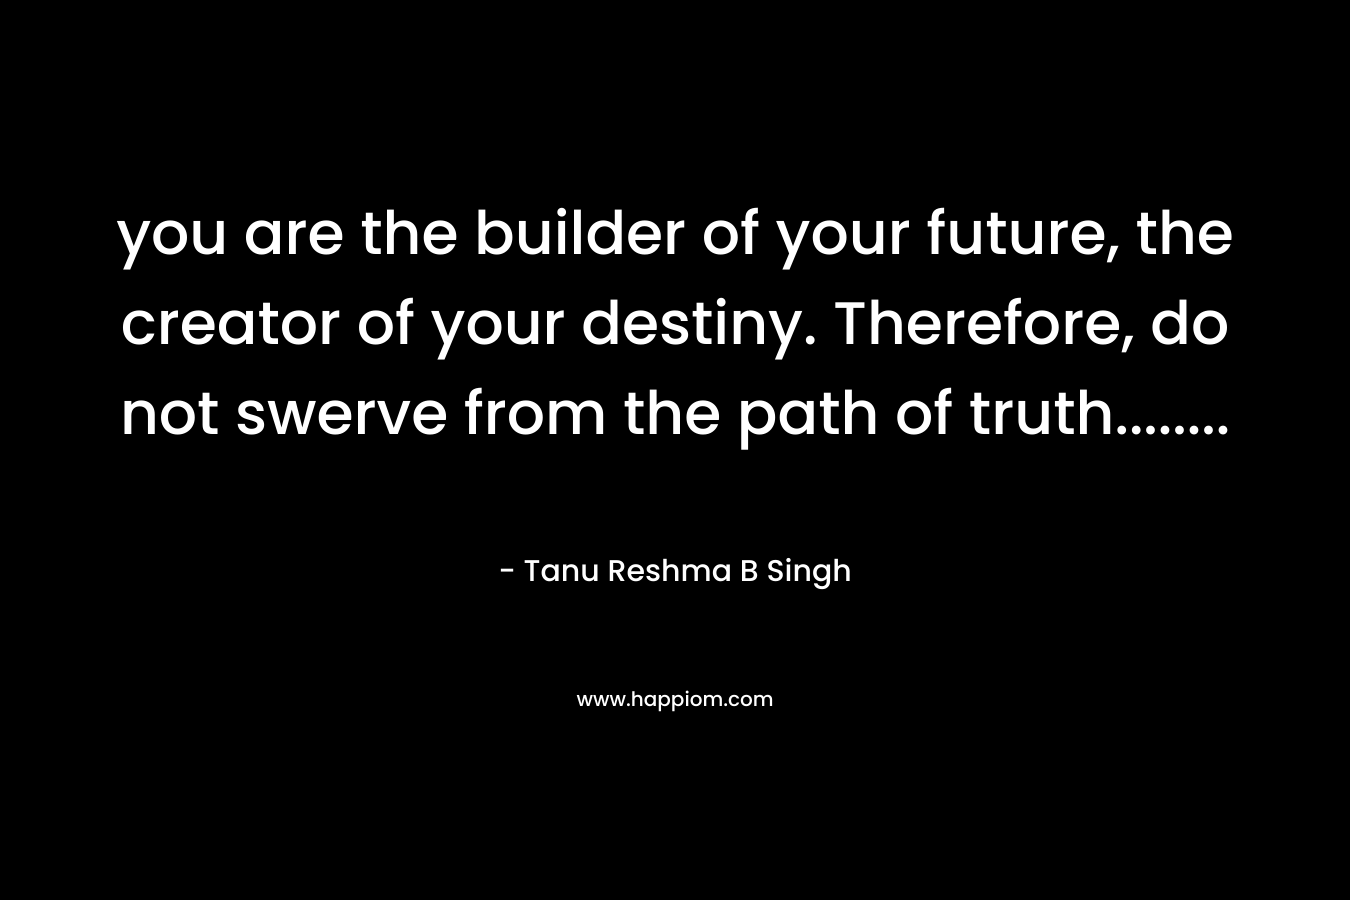 you are the builder of your future, the creator of your destiny. Therefore, do not swerve from the path of truth........